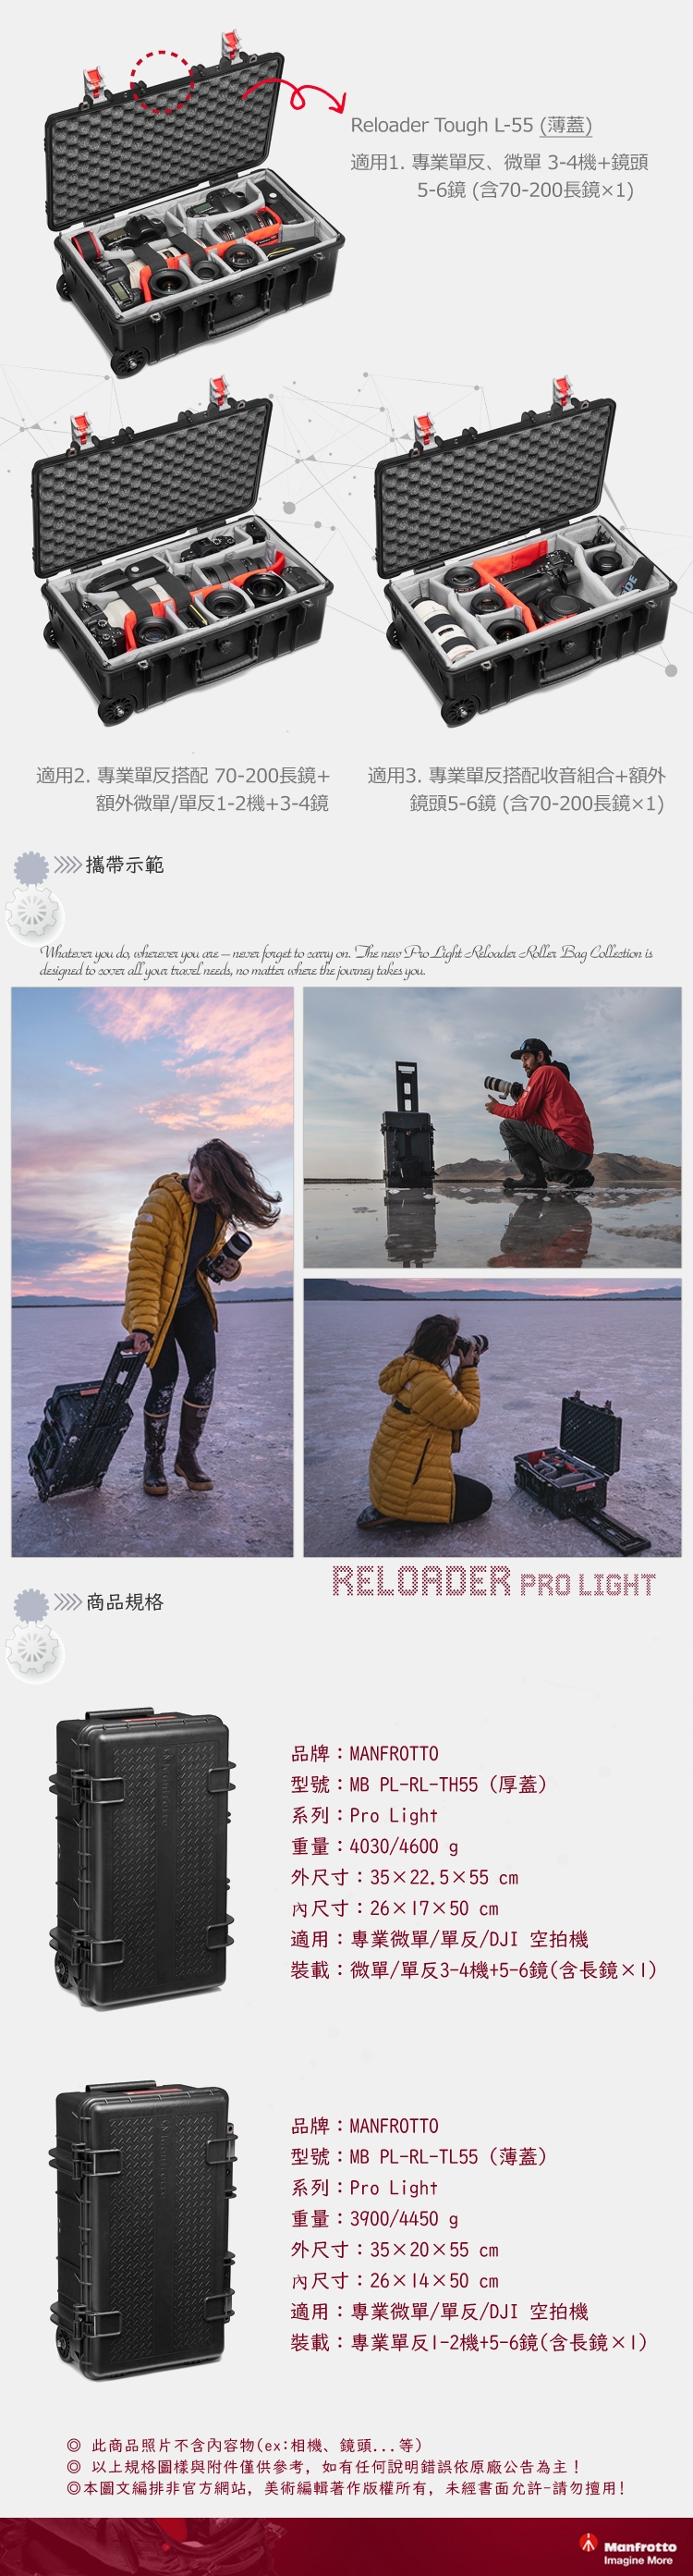 Manfrotto 旗艦級氣密箱 55 Reloader Tough L-55